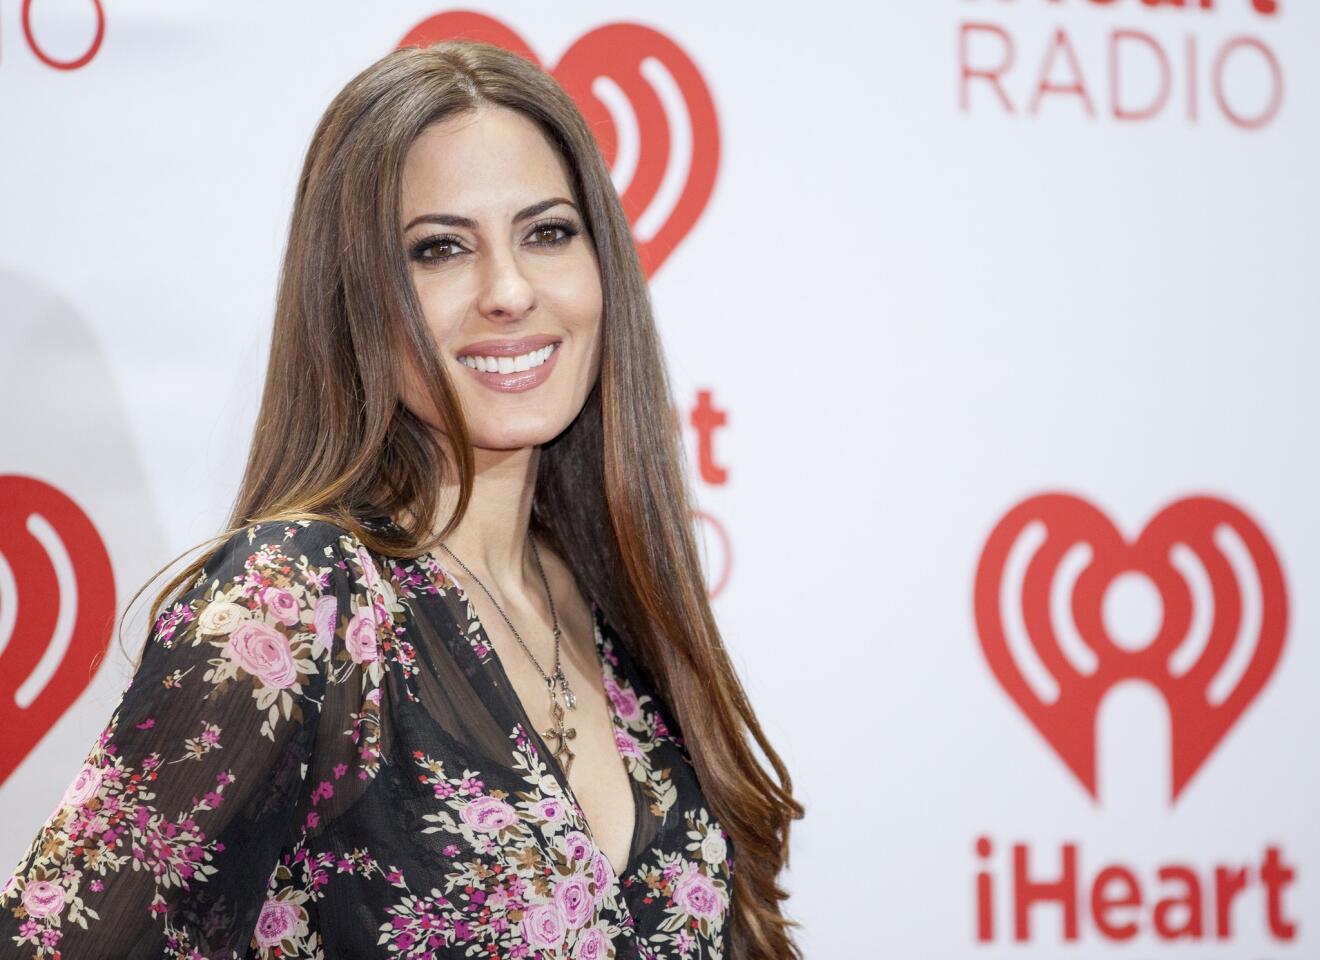 Kerri Kasem stages protest in hopes to see ailing father